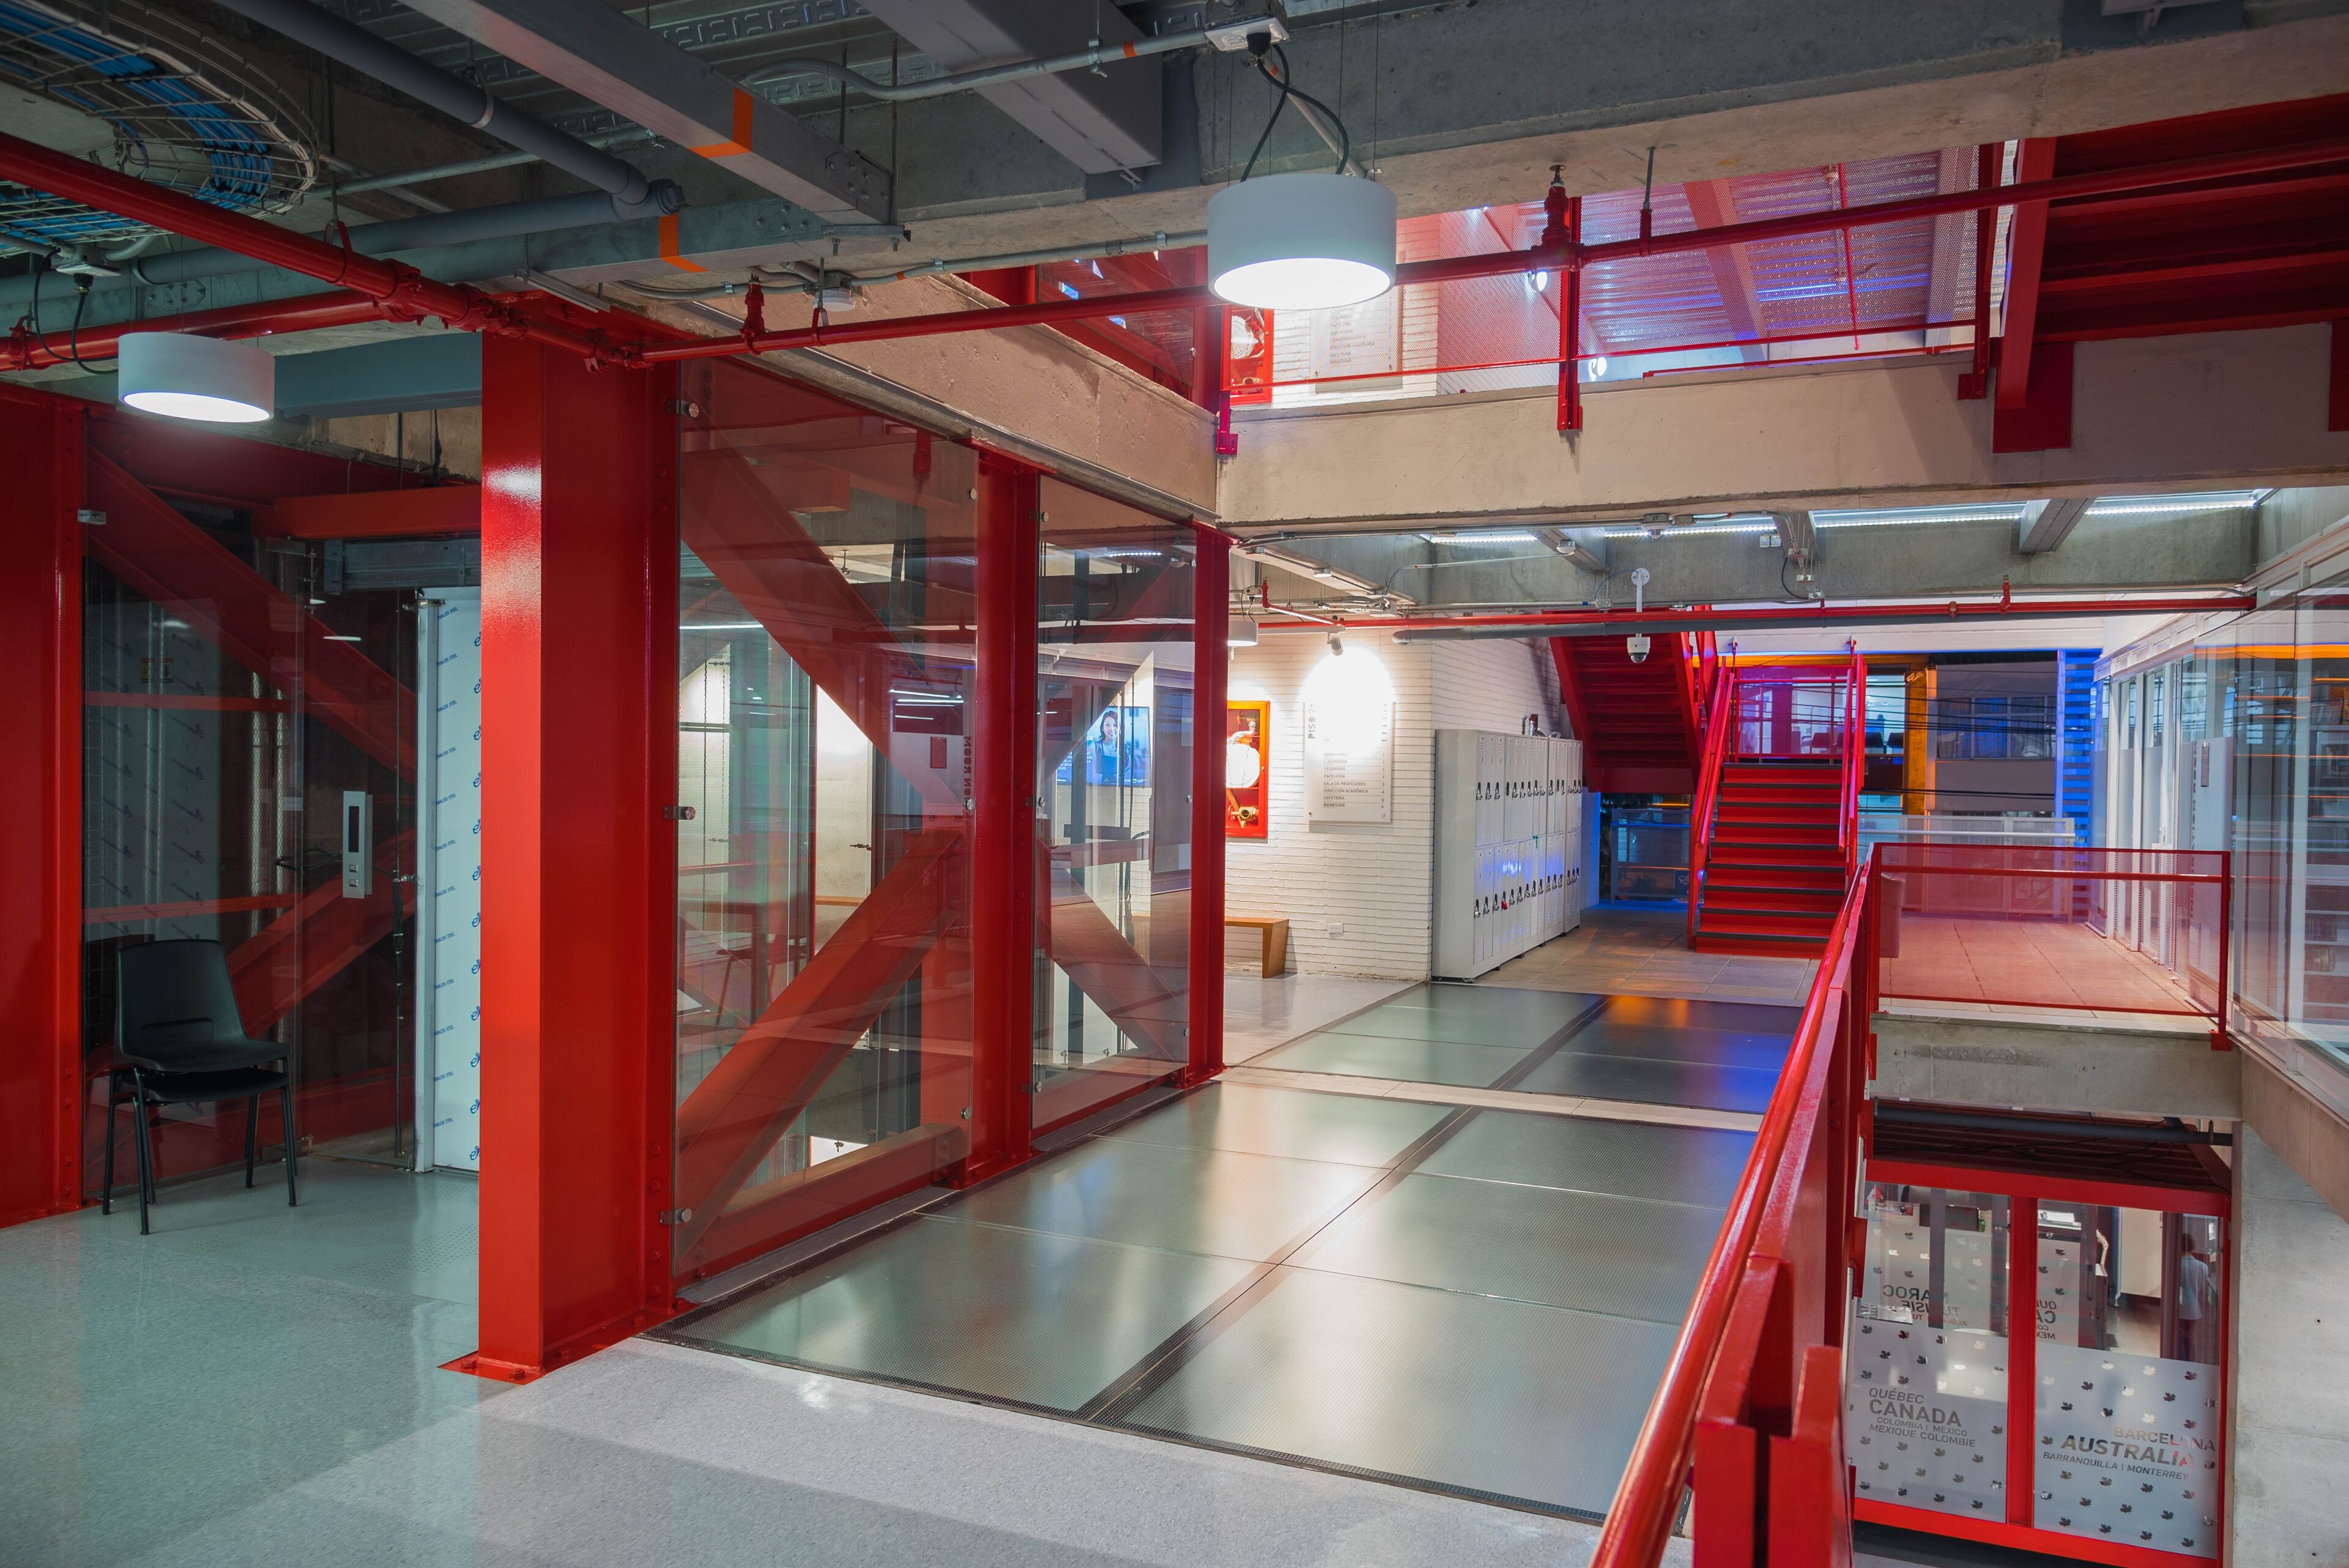 Interior view of an office with industrial design elements, featuring red structural beams, glass partitions, and modern lighting.